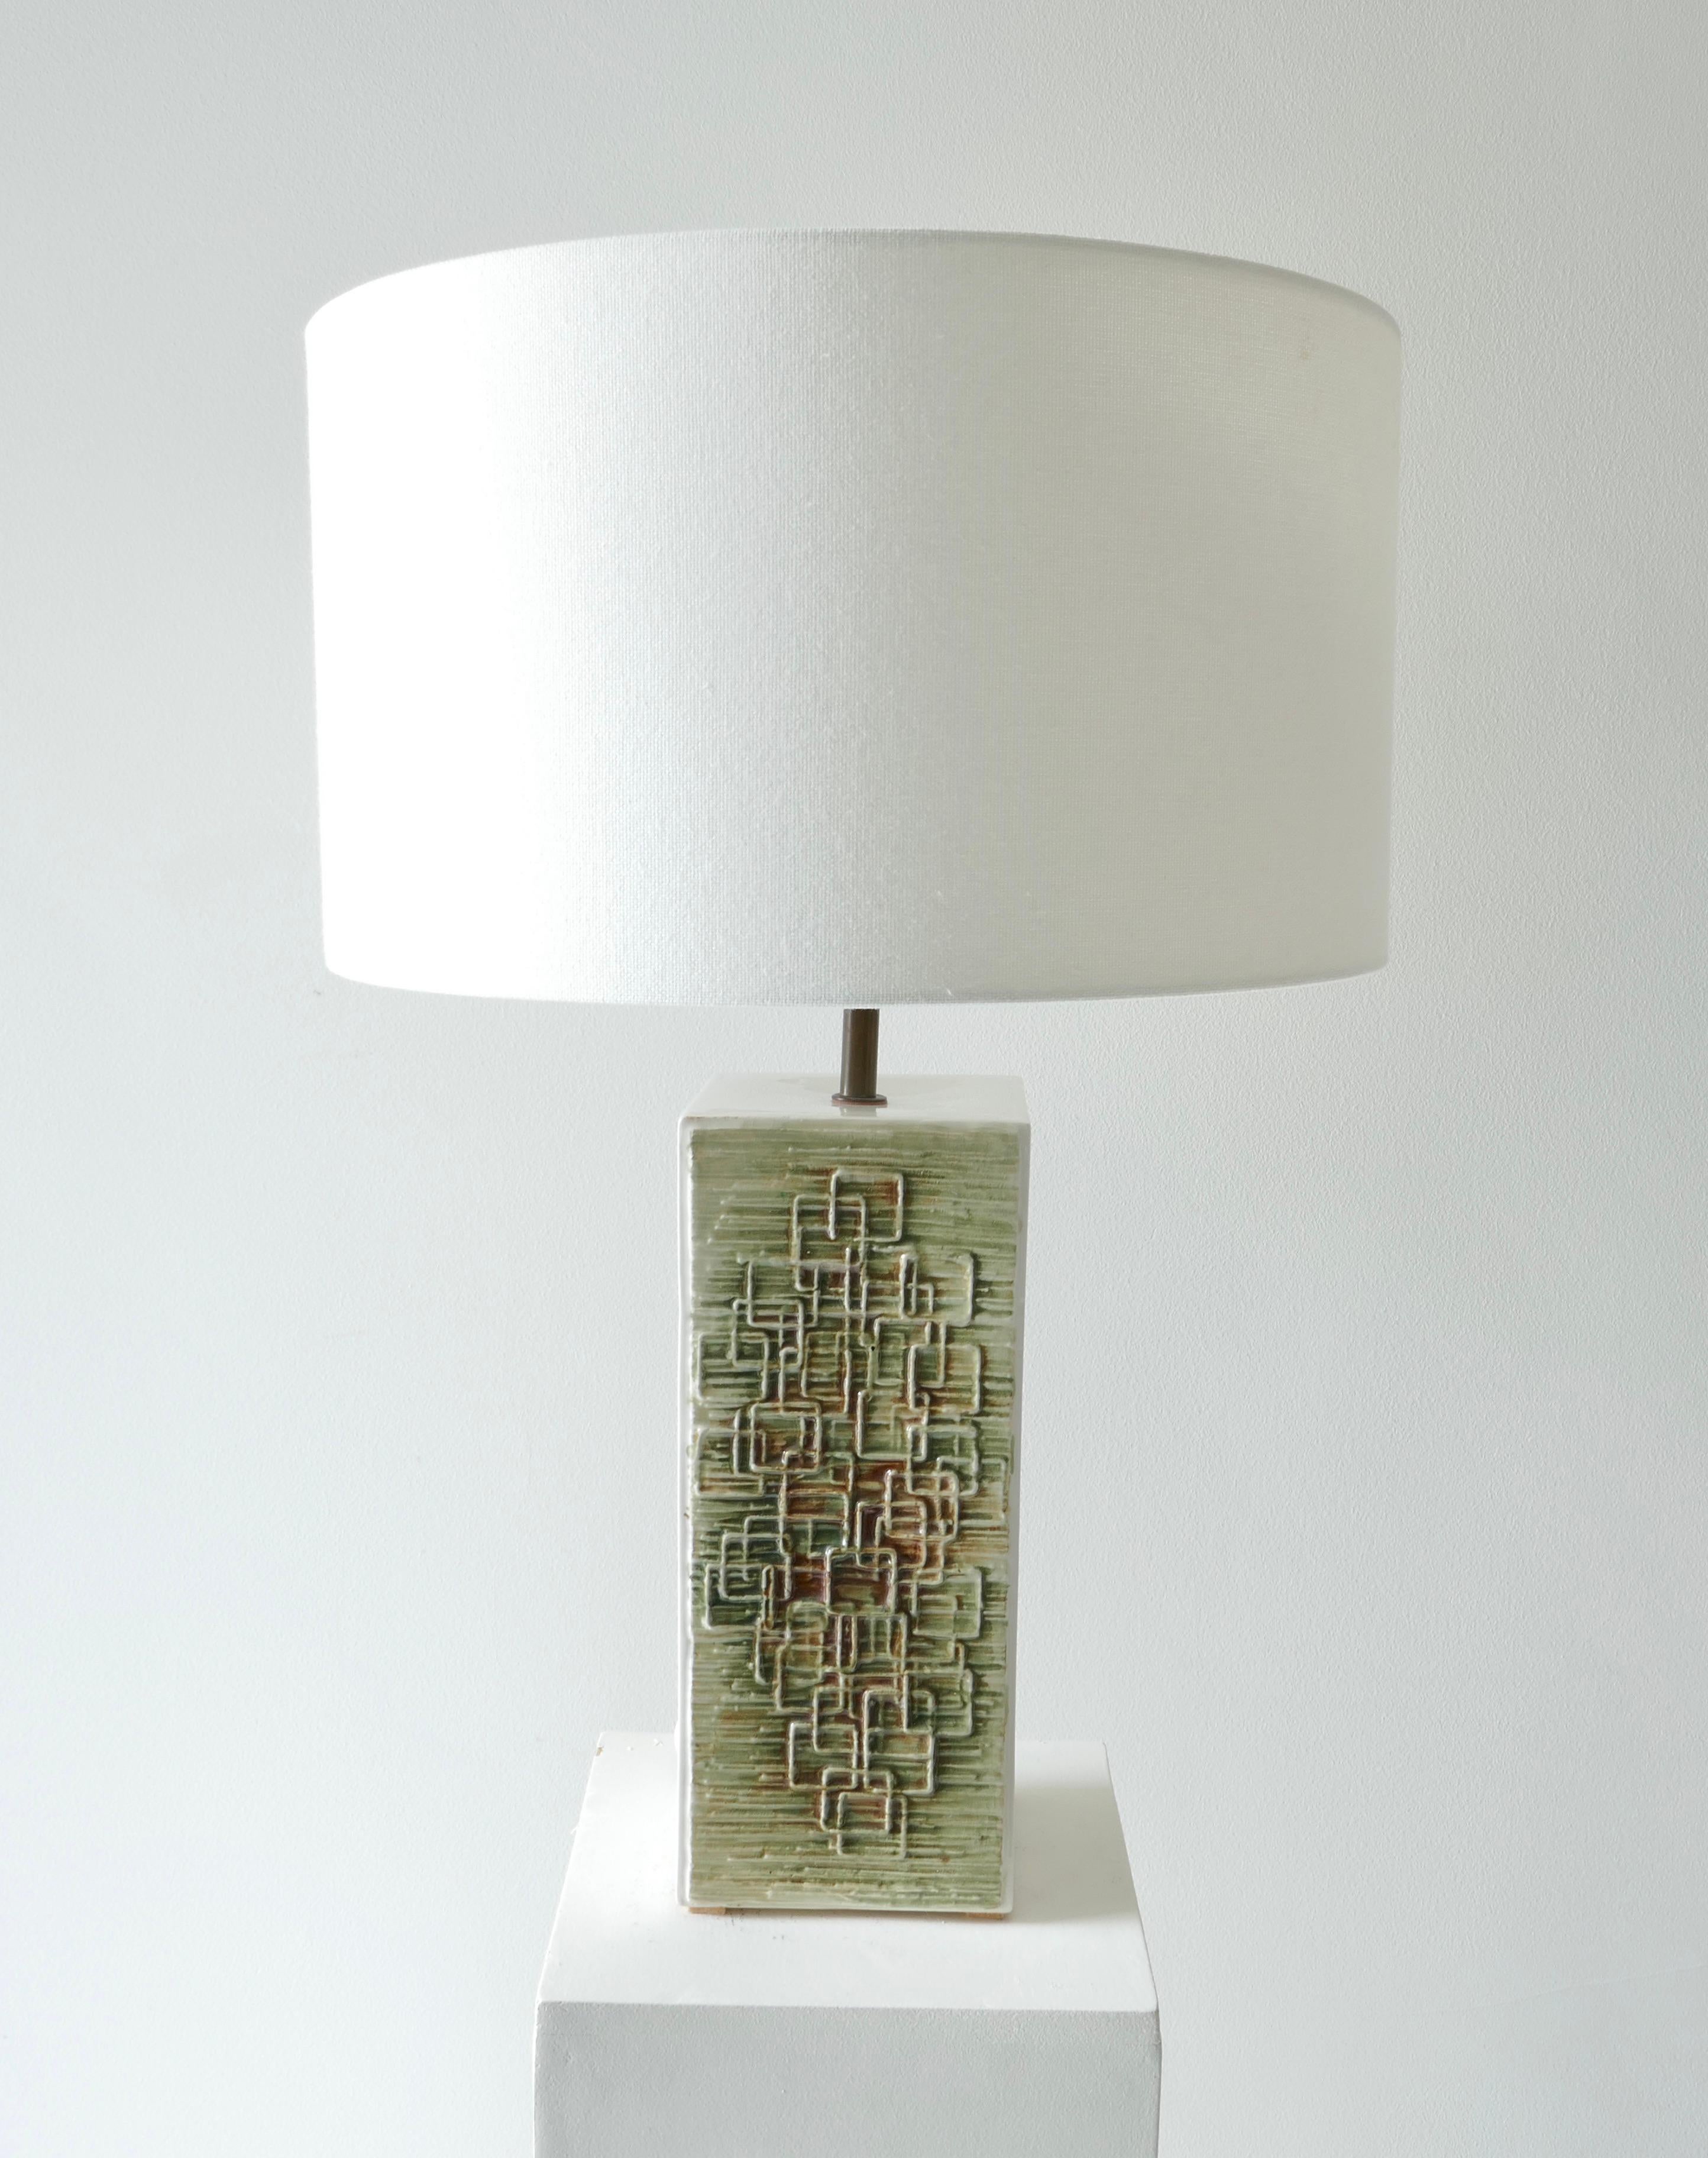 1970s German ceramic lamp
Off white base with 2 sides with geometric relief over a a green background with touch of brown in cubist style.

Measures: Lamp base 10 x 10 x H27cm with lampshade the overall height is 57cm.

 